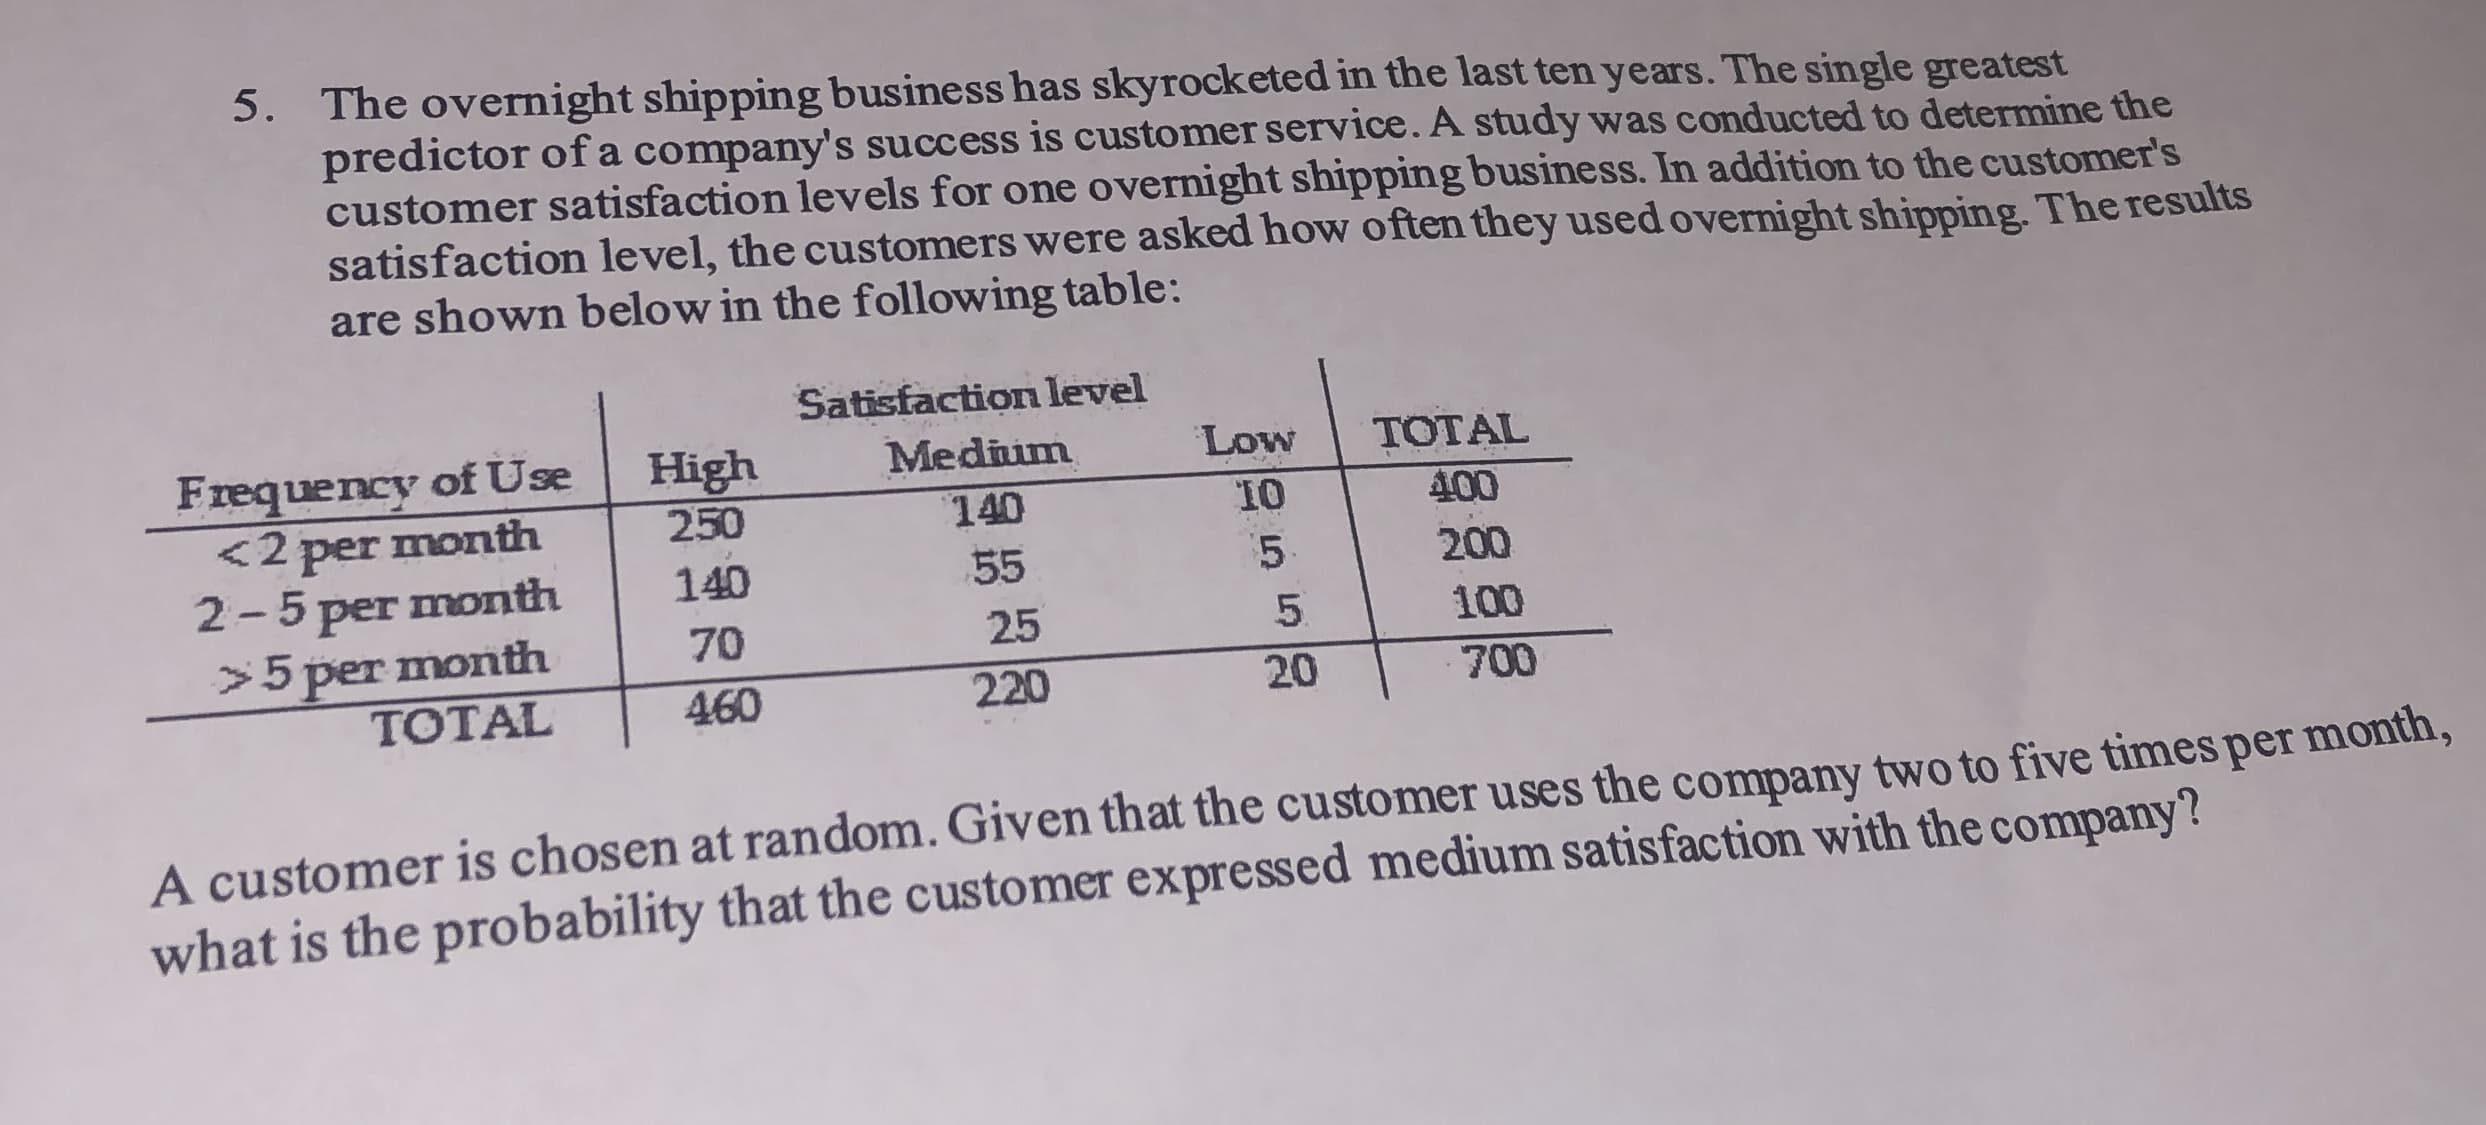 5. The overnight shipping business has skyrocketed in the last ten years. The single greatest
predictor of a company's success is customer service. A study was conducted to determine the
customer satisfaction levels for one overnight shipping business. In addition to the customer's
satisfaction level, the customers were asked how often they used overnight shipping. The results
are shown below in the following table:
Satisfaction level
Frequency of Use
<2 per month
2-5 per month
>5 per month
TOTAL
High
250
Low
Medium
TOTAL
400
140
10
5.
5.
55
200
140
100
25
70
20
700
220
460
A customer is chosen at random. Given that the customer uses the company two to five times per month,
what is the probability that the customer expressed medium satisfaction with the company?
